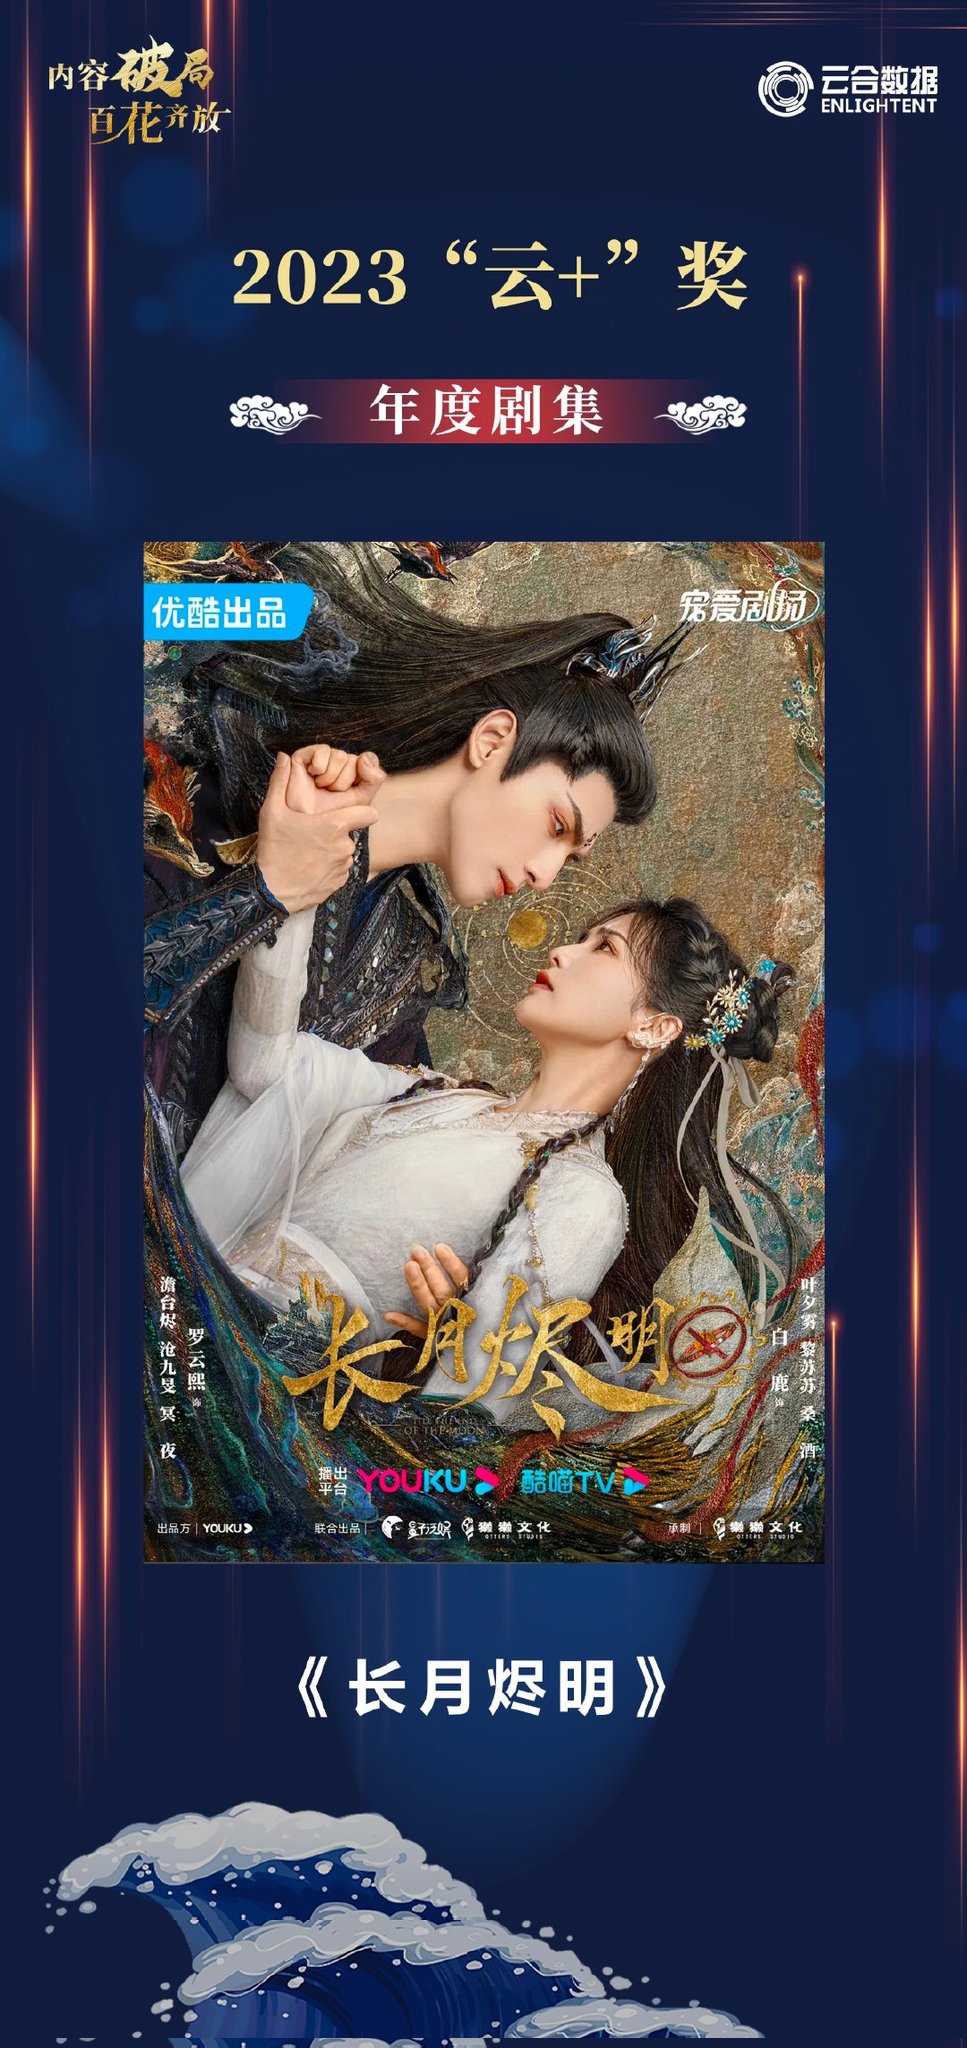 Youku - #LoveIsPanacea A new year has arrived and love is